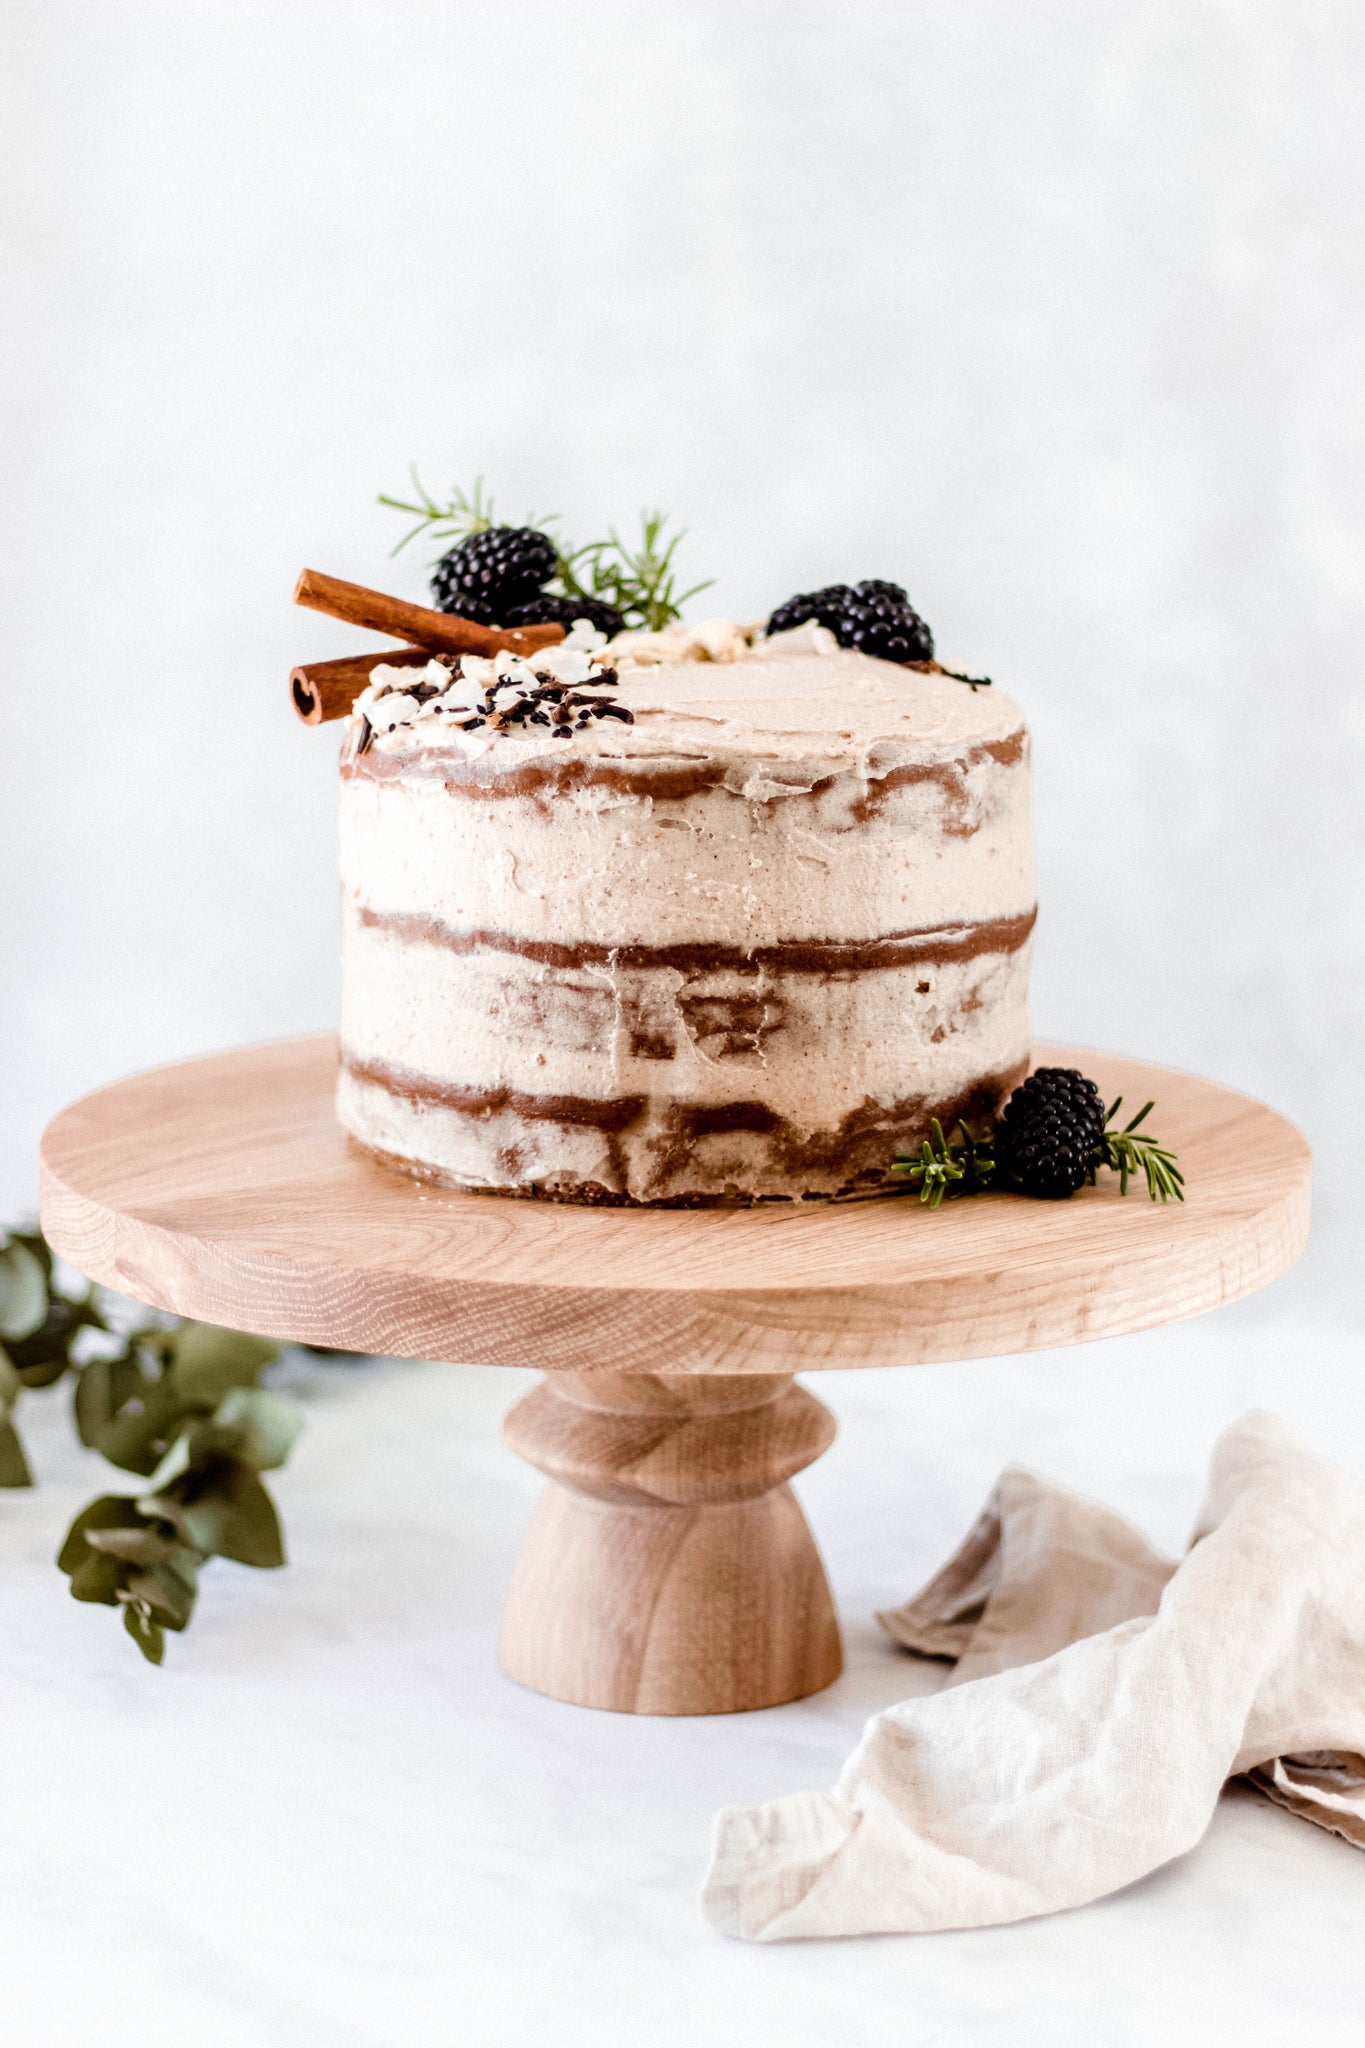 Spiced Rooibos Cake with Cinnamon Cashew Frosting